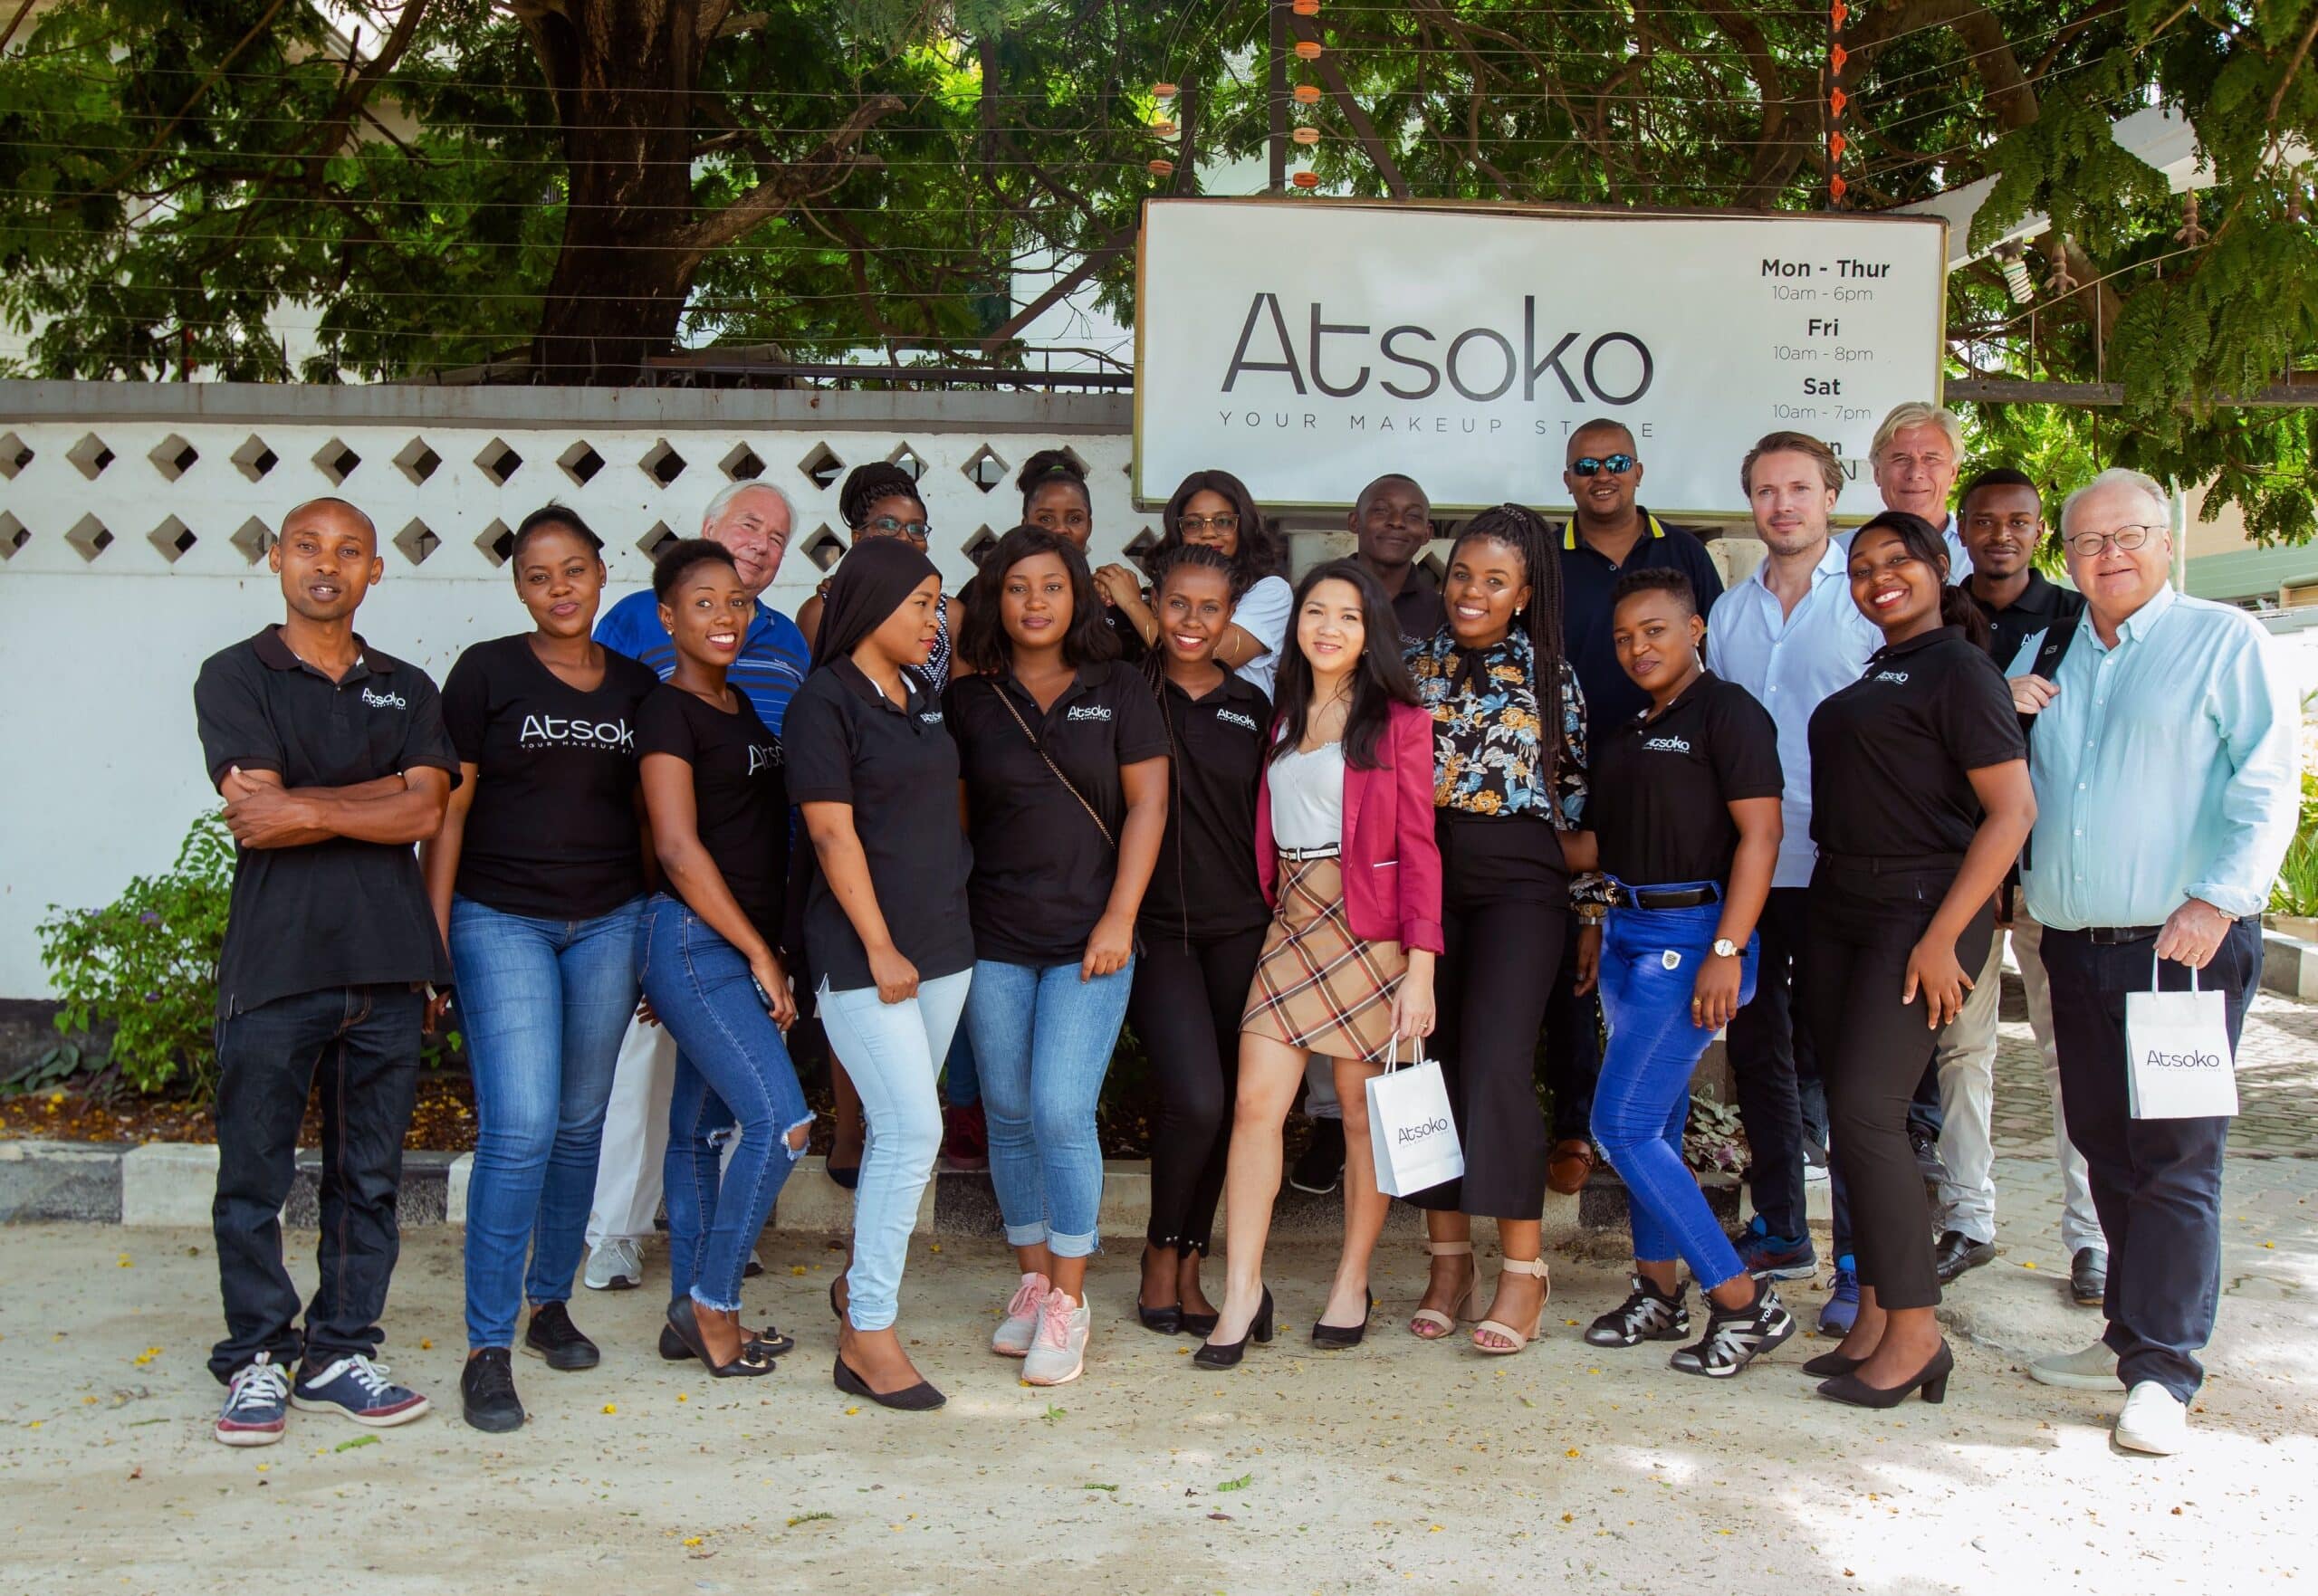 MTI investment team, along with Atsoko makeup store , posing in front of the store